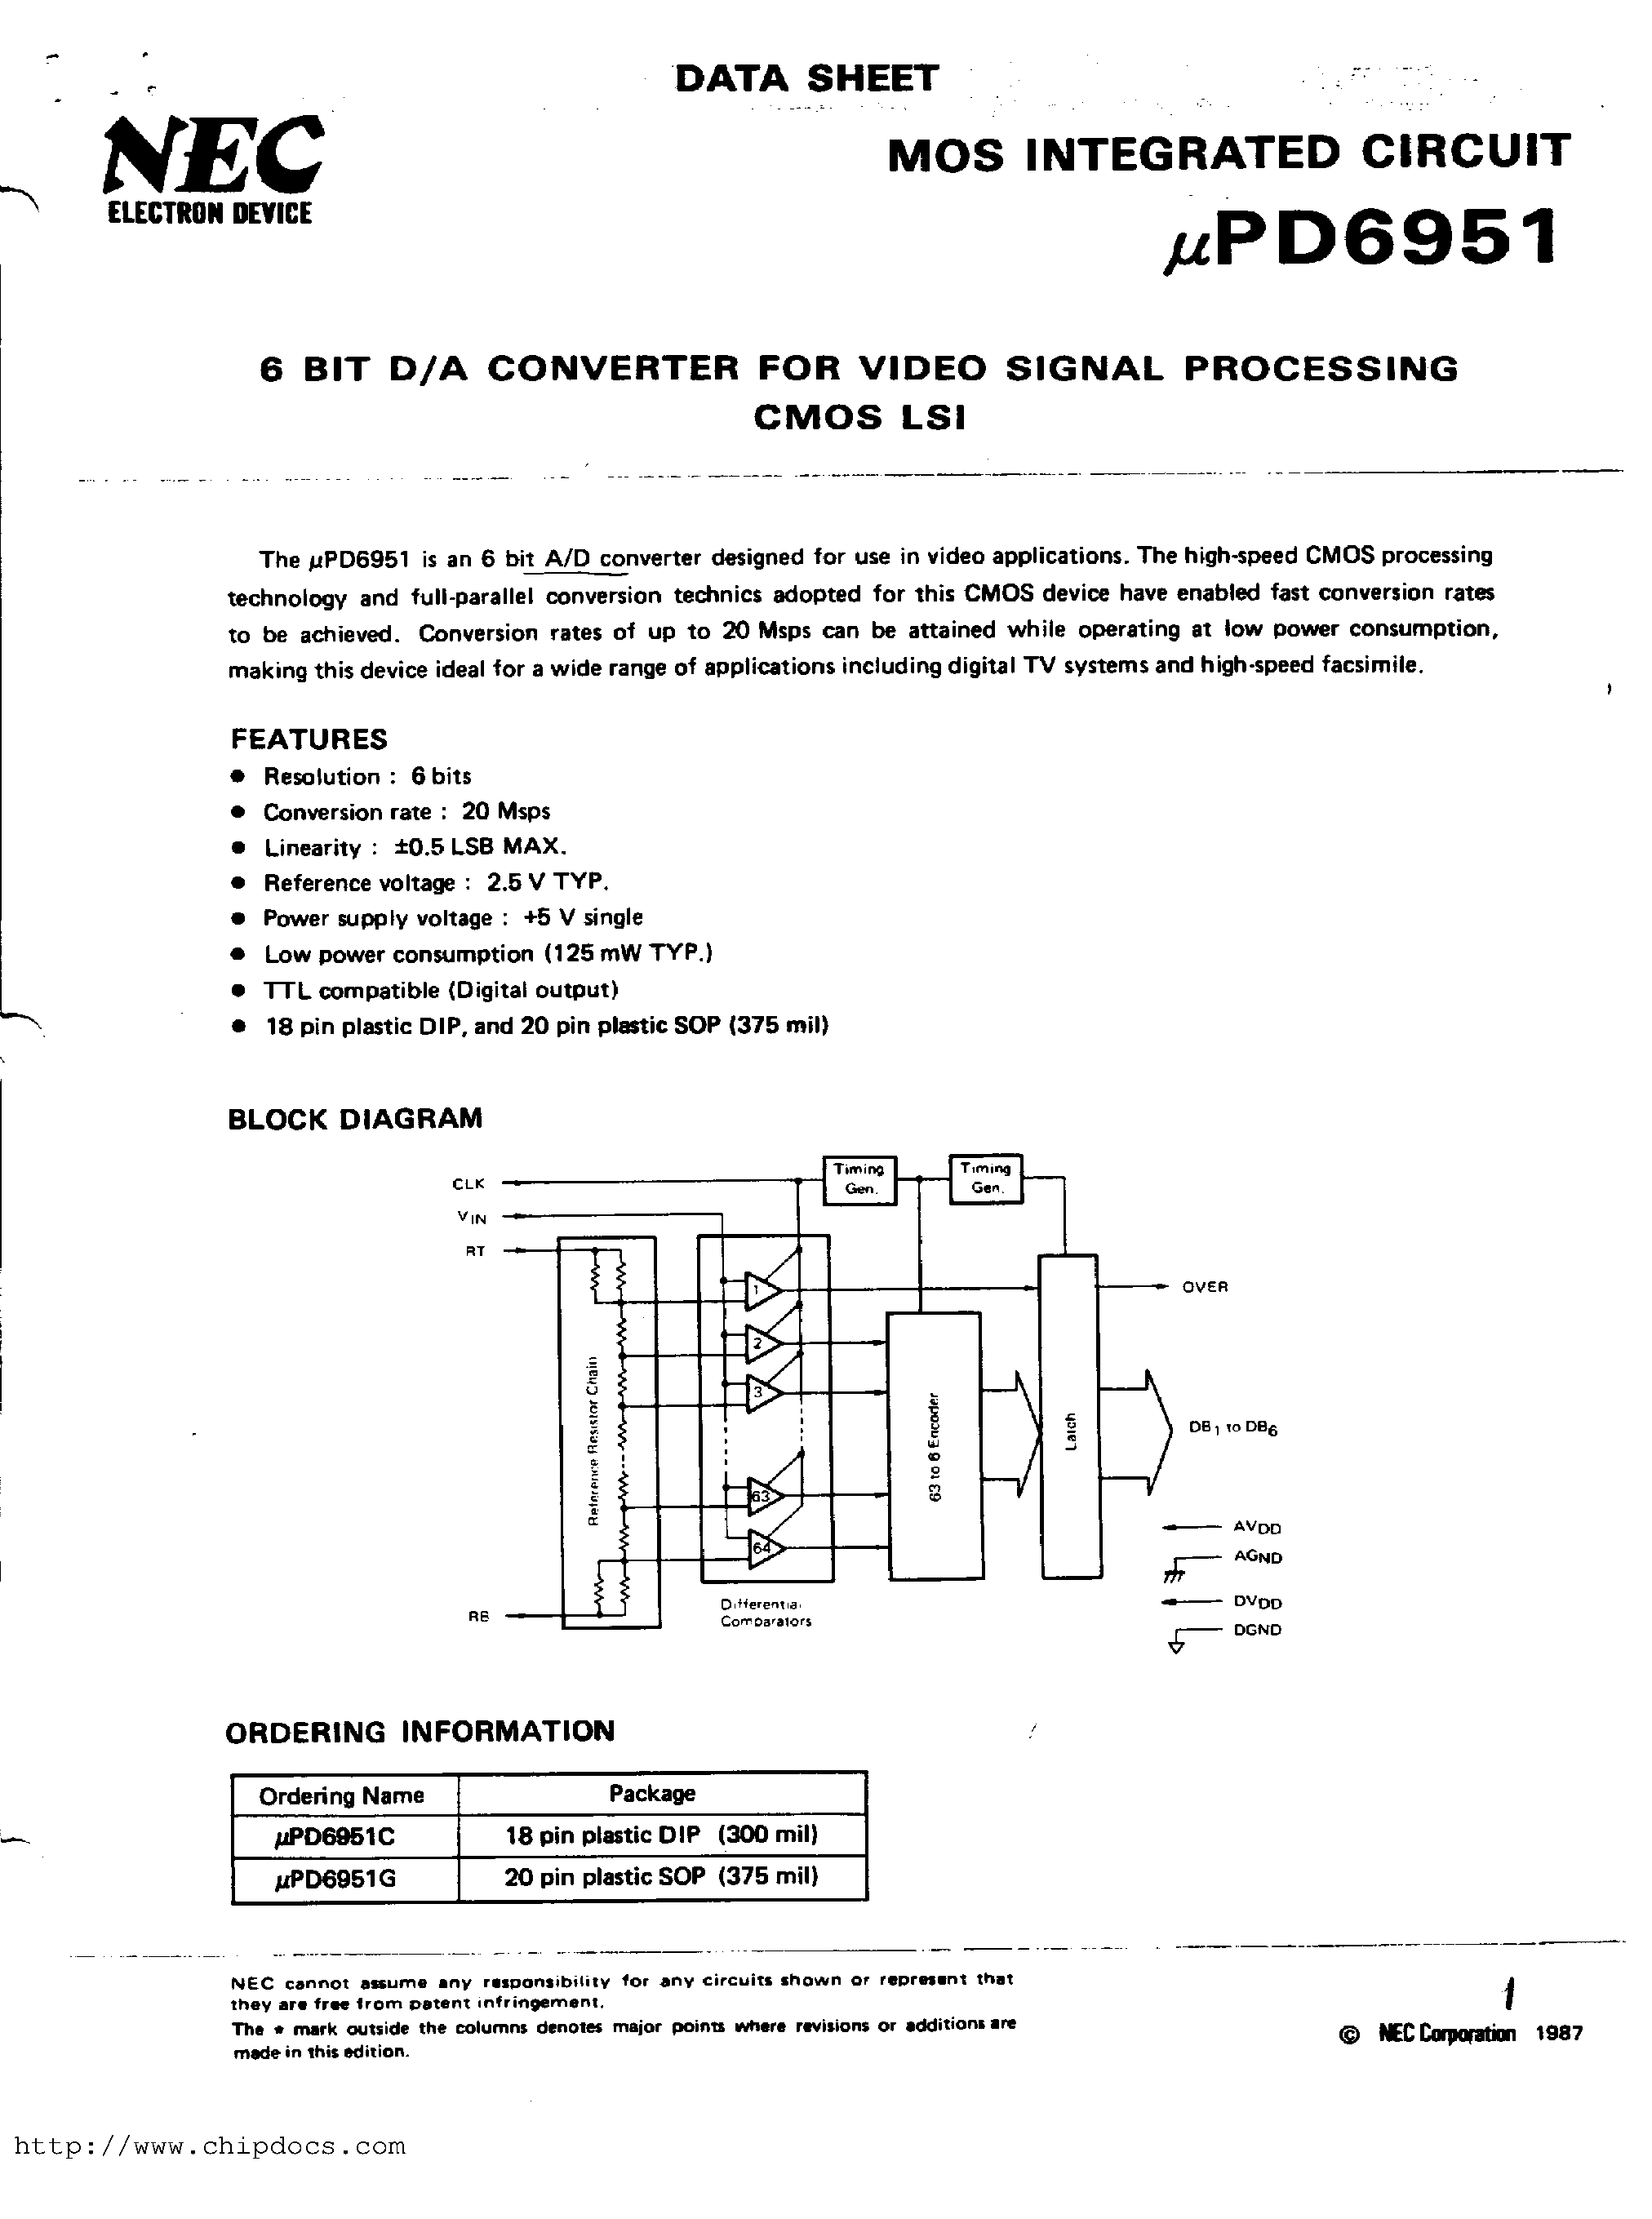 Datasheet UPD6951G - 6 BIT D/A CONVERTER FOR VIDEO SIGNAL PROCESSING CMOS LSI page 1